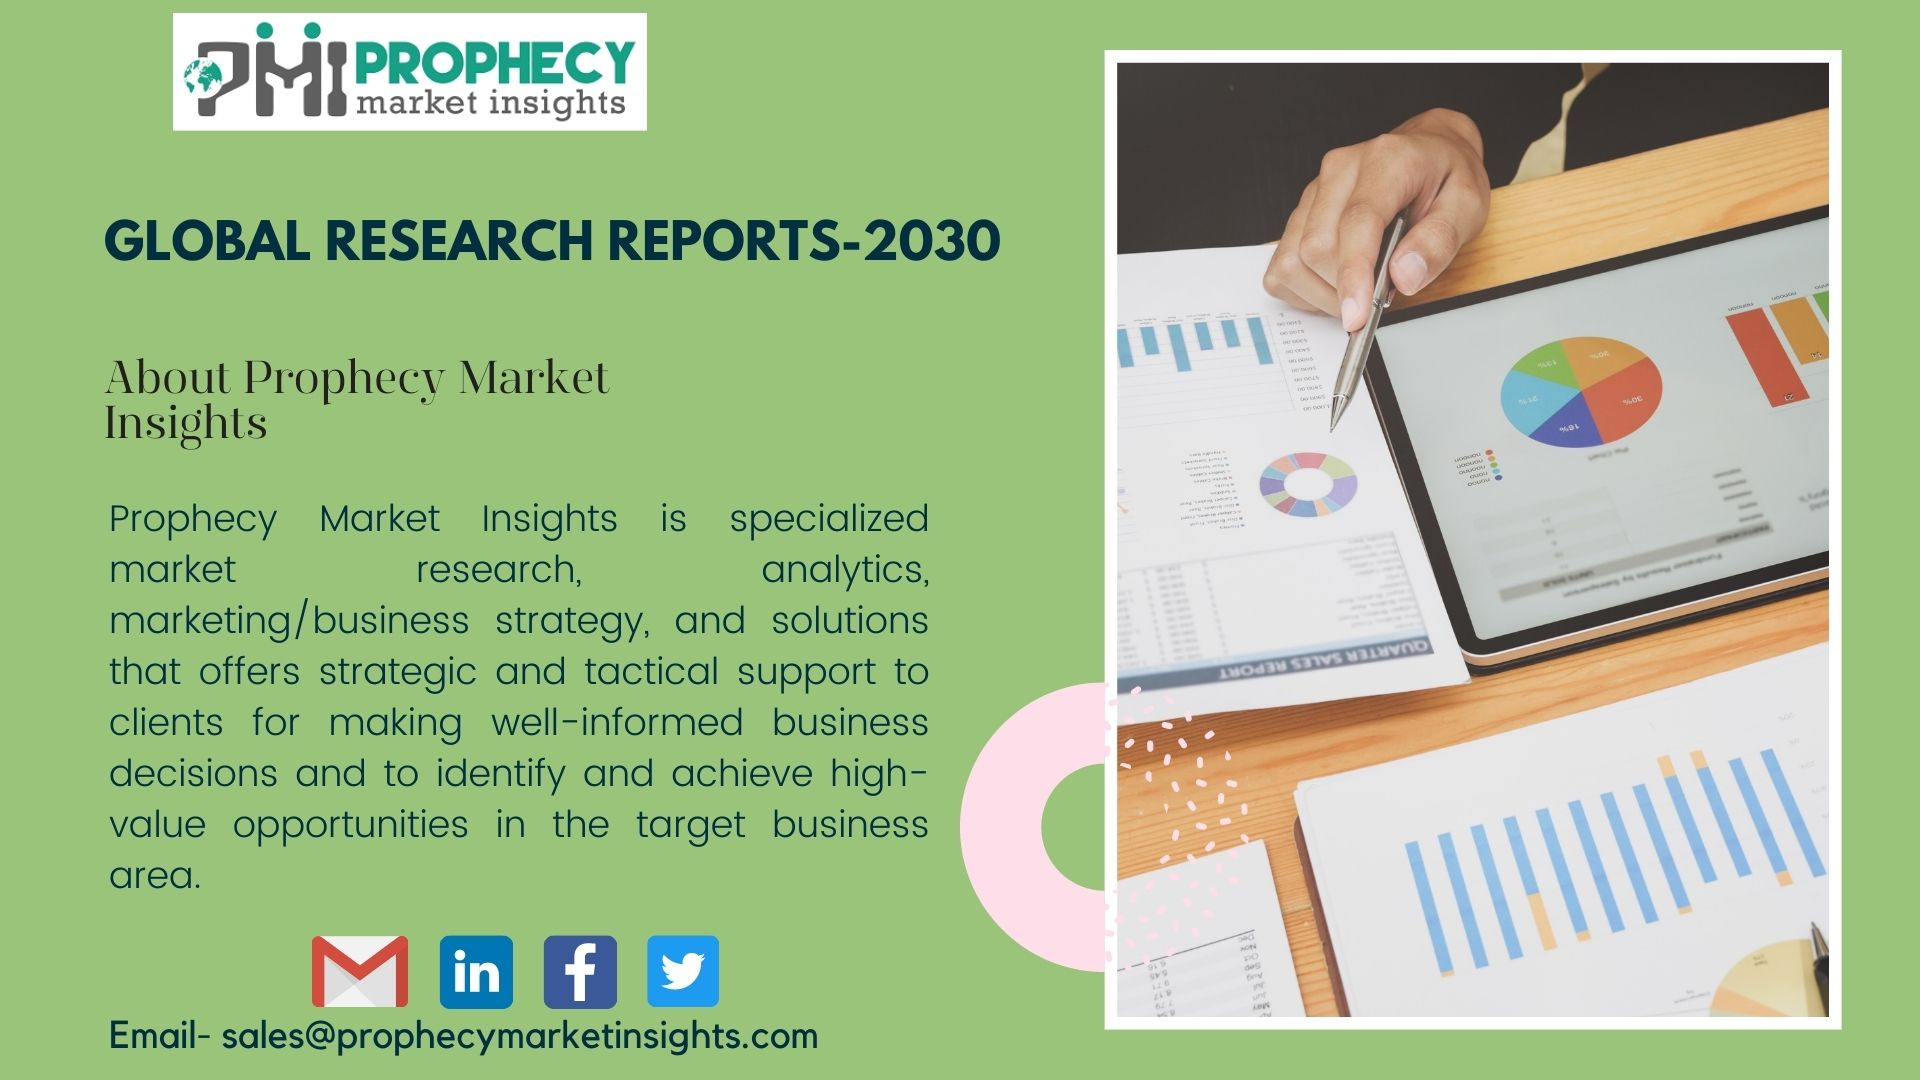 About Prophecy Market Insights (1)-d9742bd5